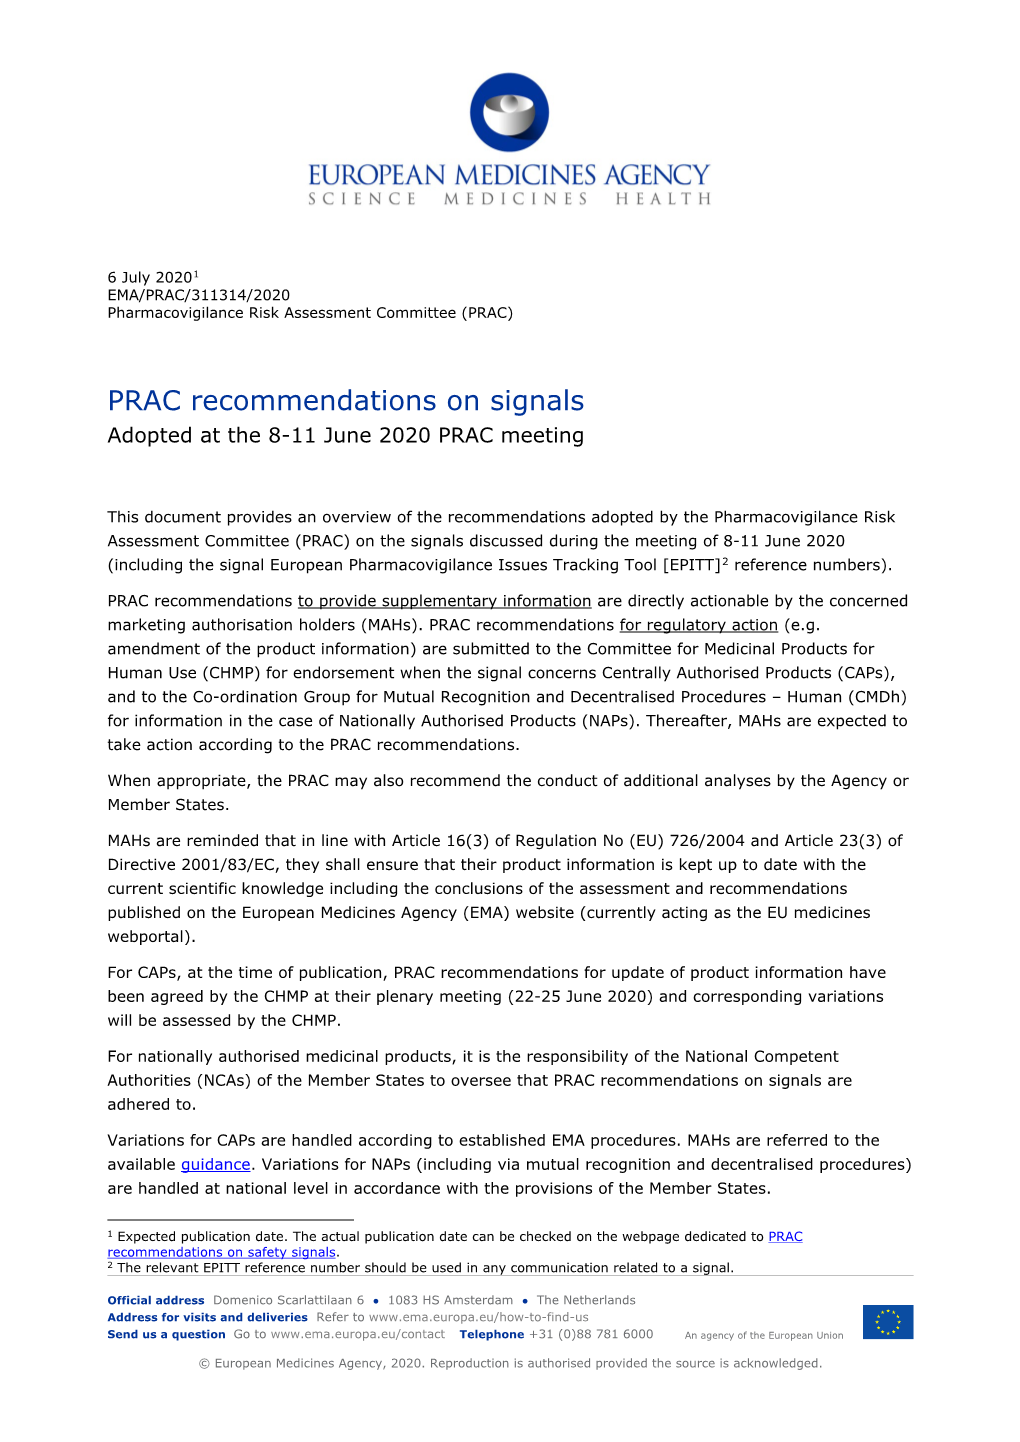 PRAC Recommendation on Signals June 2020